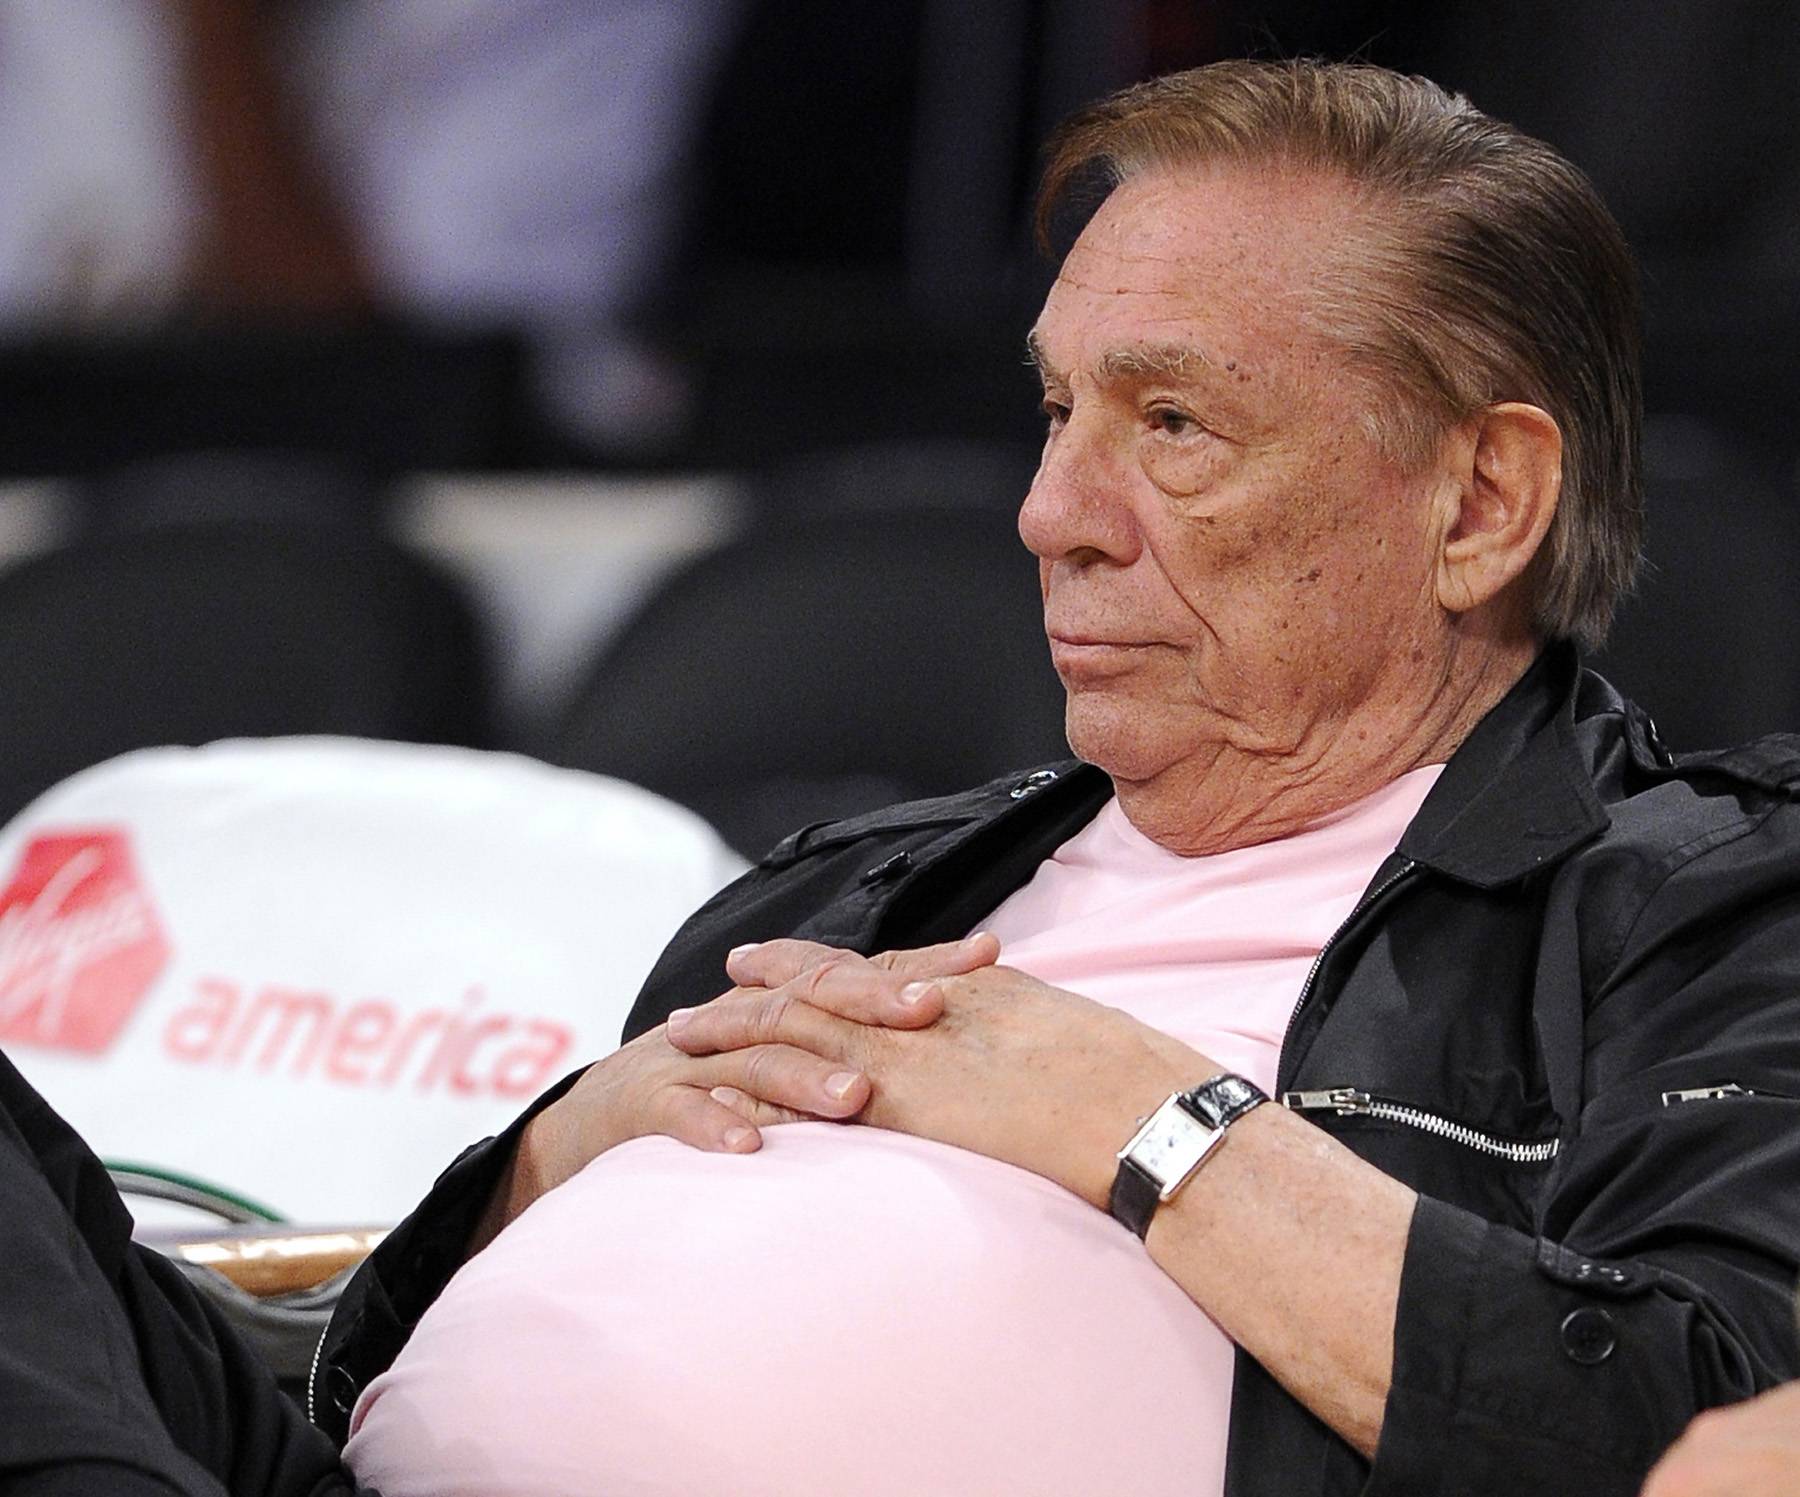 Donald Sterling, Shelly Sterling, Los Angeles Clippers